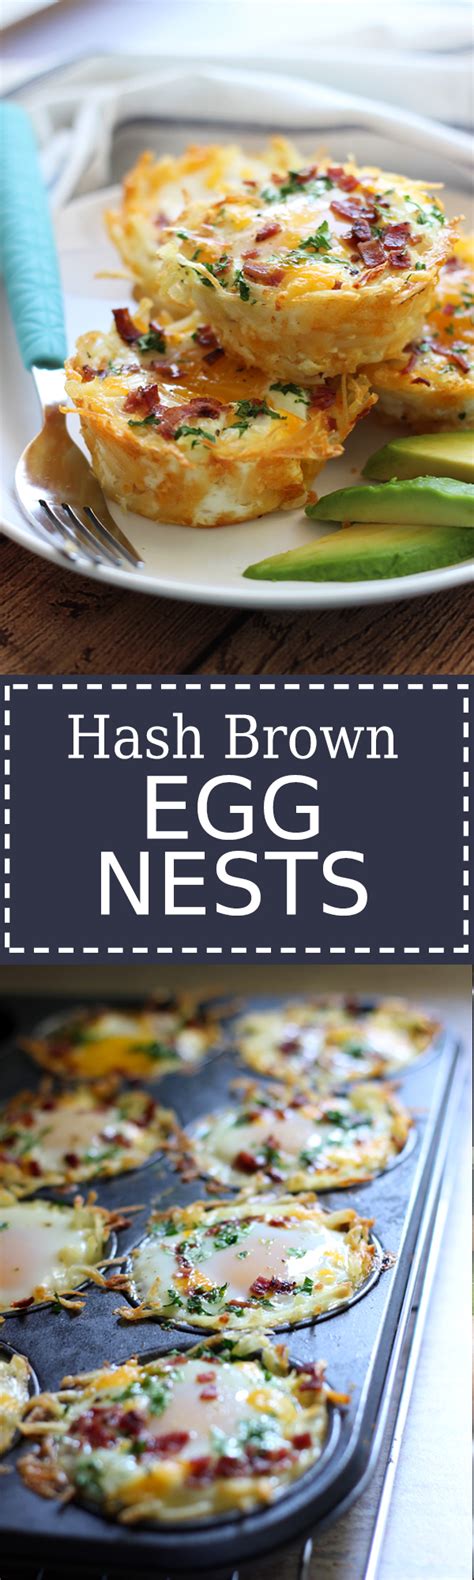 Step 3 bake in the preheated oven until hash browns are browned on the edges and cheese has melted, 15 to 18 minutes. Hash Brown Egg Nests with Avocado - The Cooking Jar ...